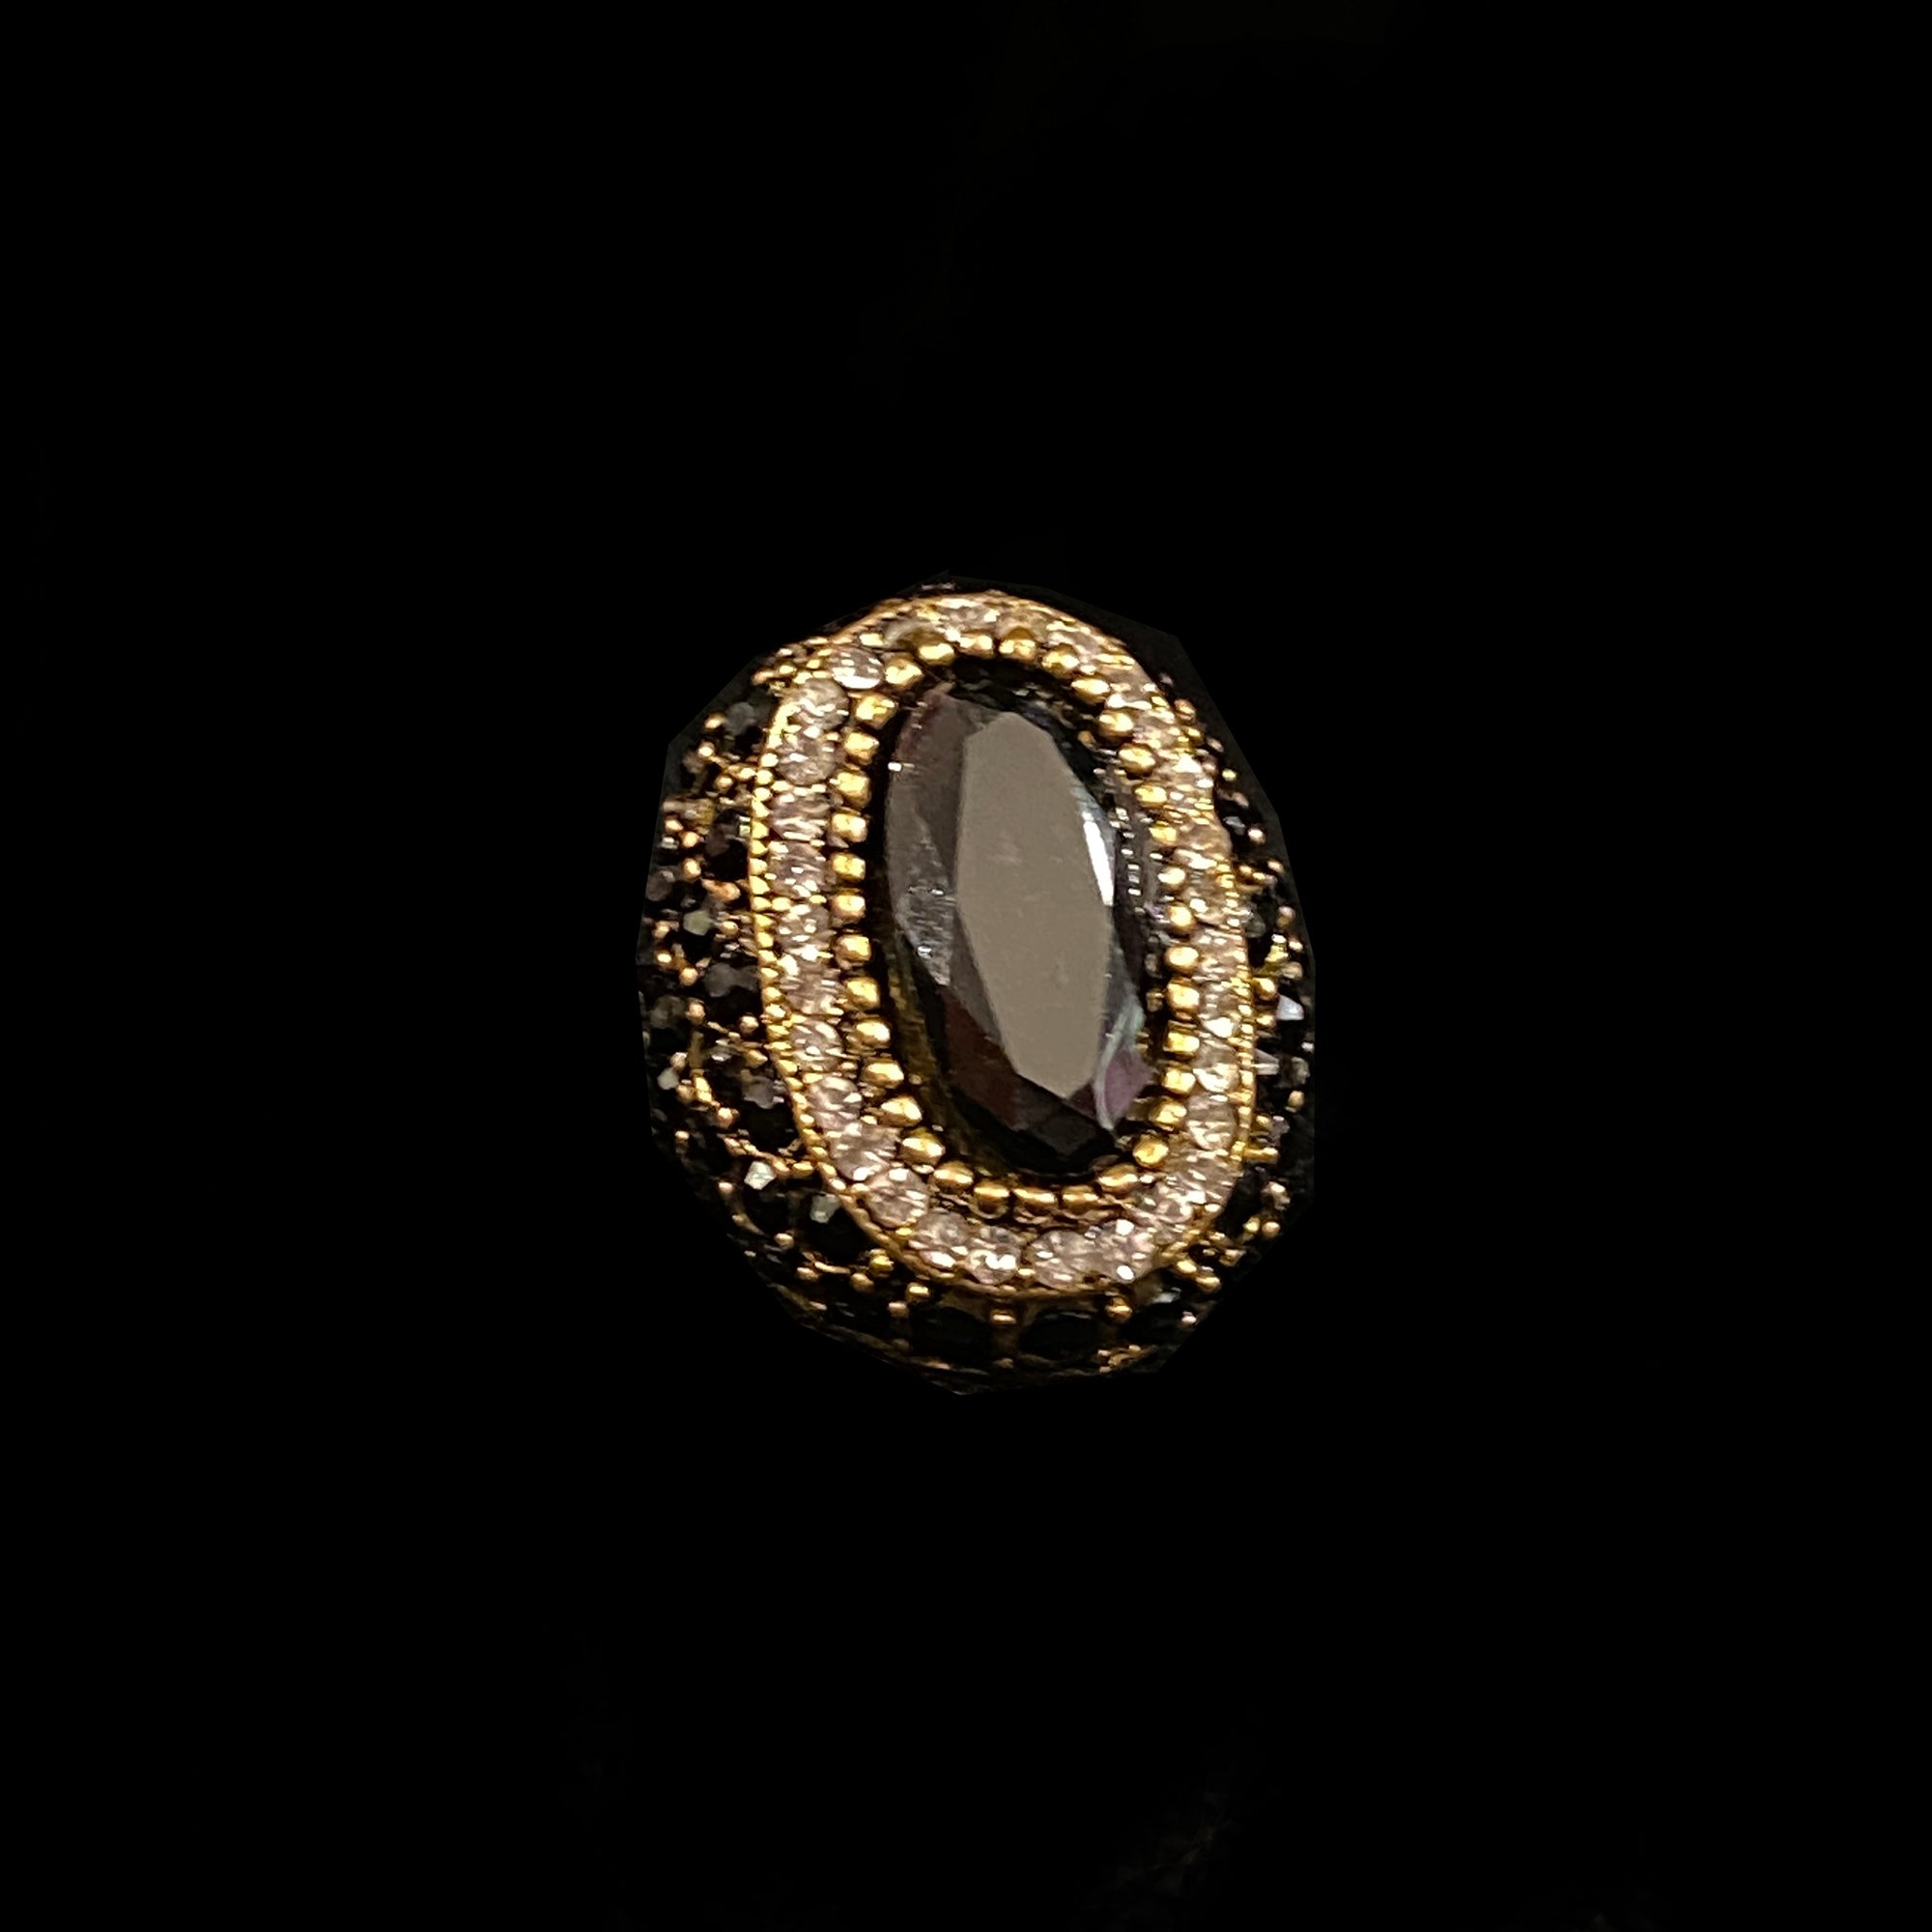 Black Cocktail Ring-3 styles - Vintage India NYC